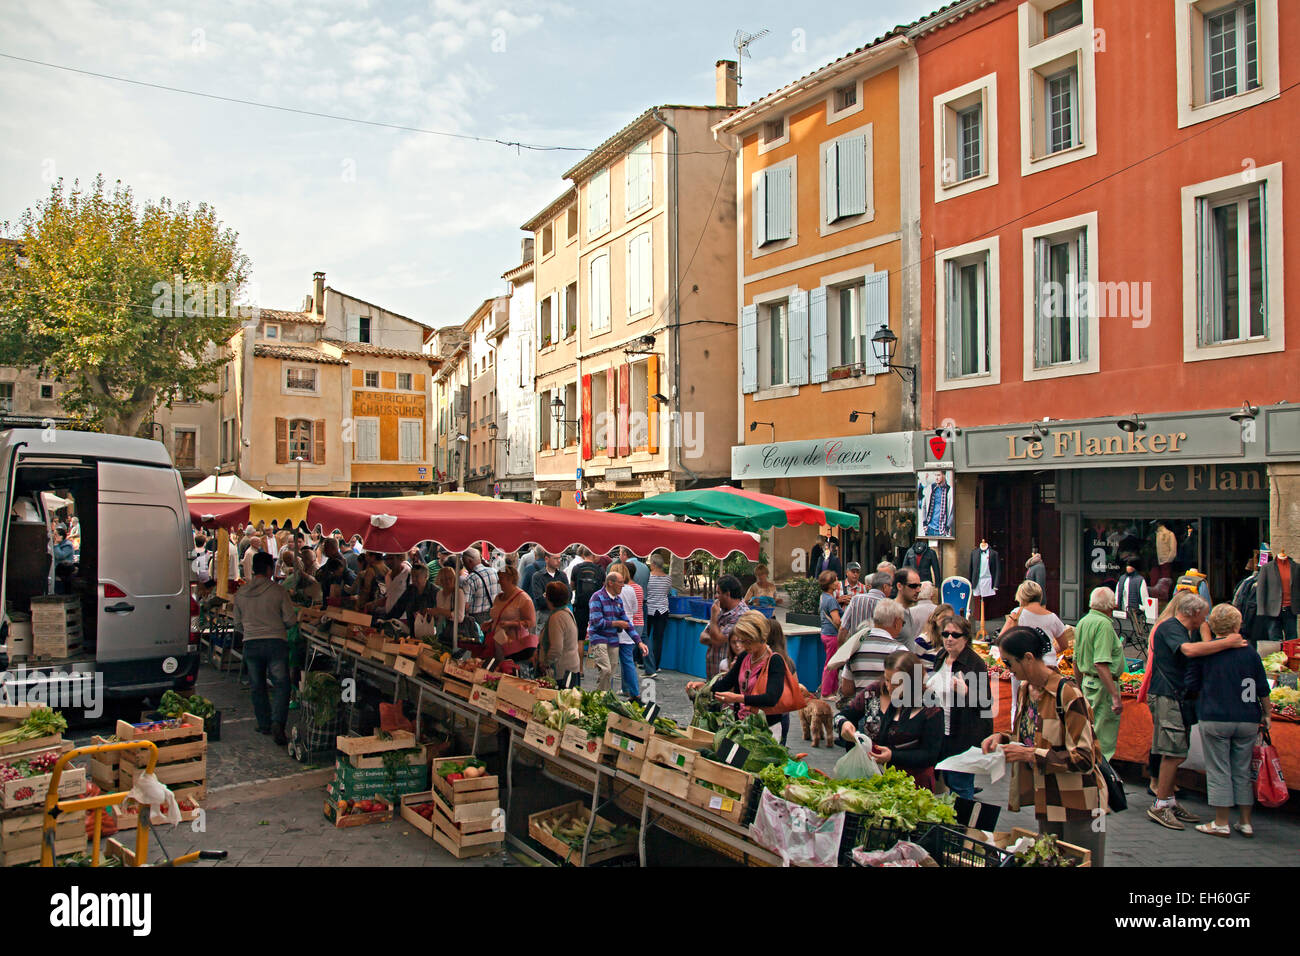 Produce, pottery, vintage clothing, toys, food, and antiques share  sidewalks on market days in L'Isle-Sur-la-Sorgue, France Stock Photo - Alamy